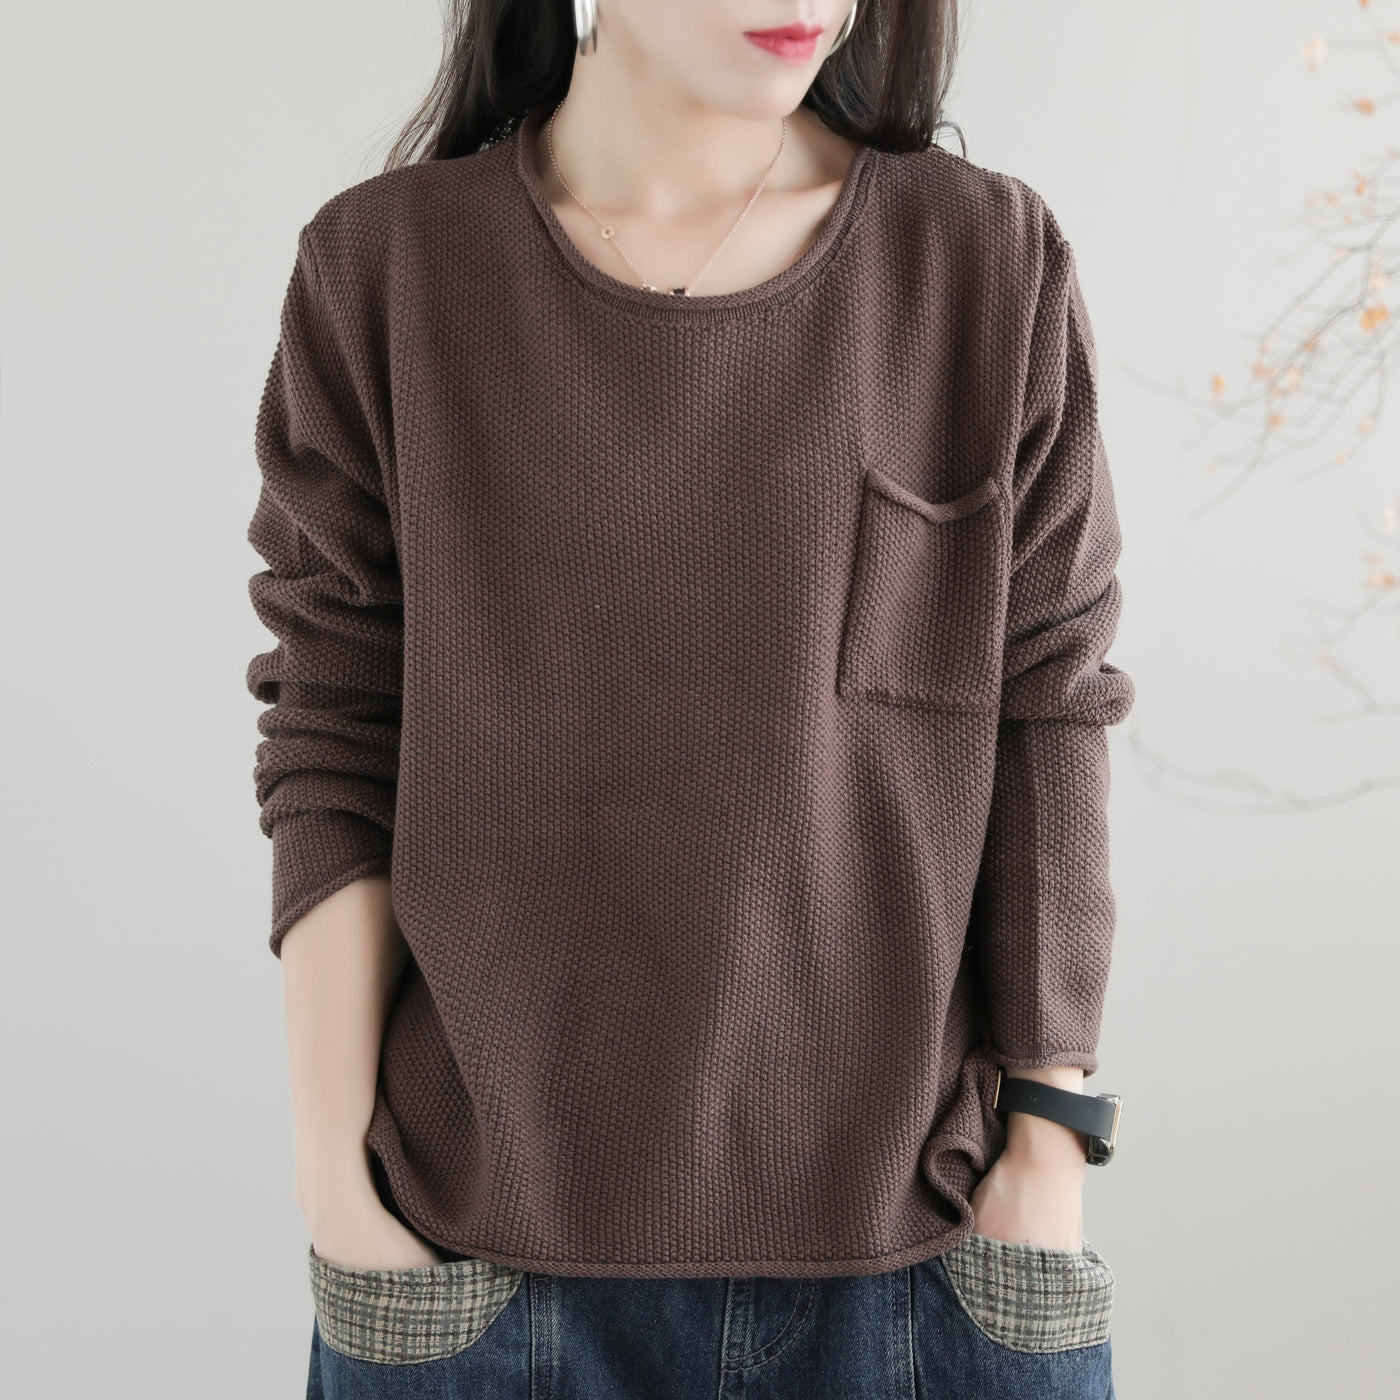 Women Autumn Solid Retro Cotton Knitted Sweater Aug 2022 New Arrival One Size Brown 